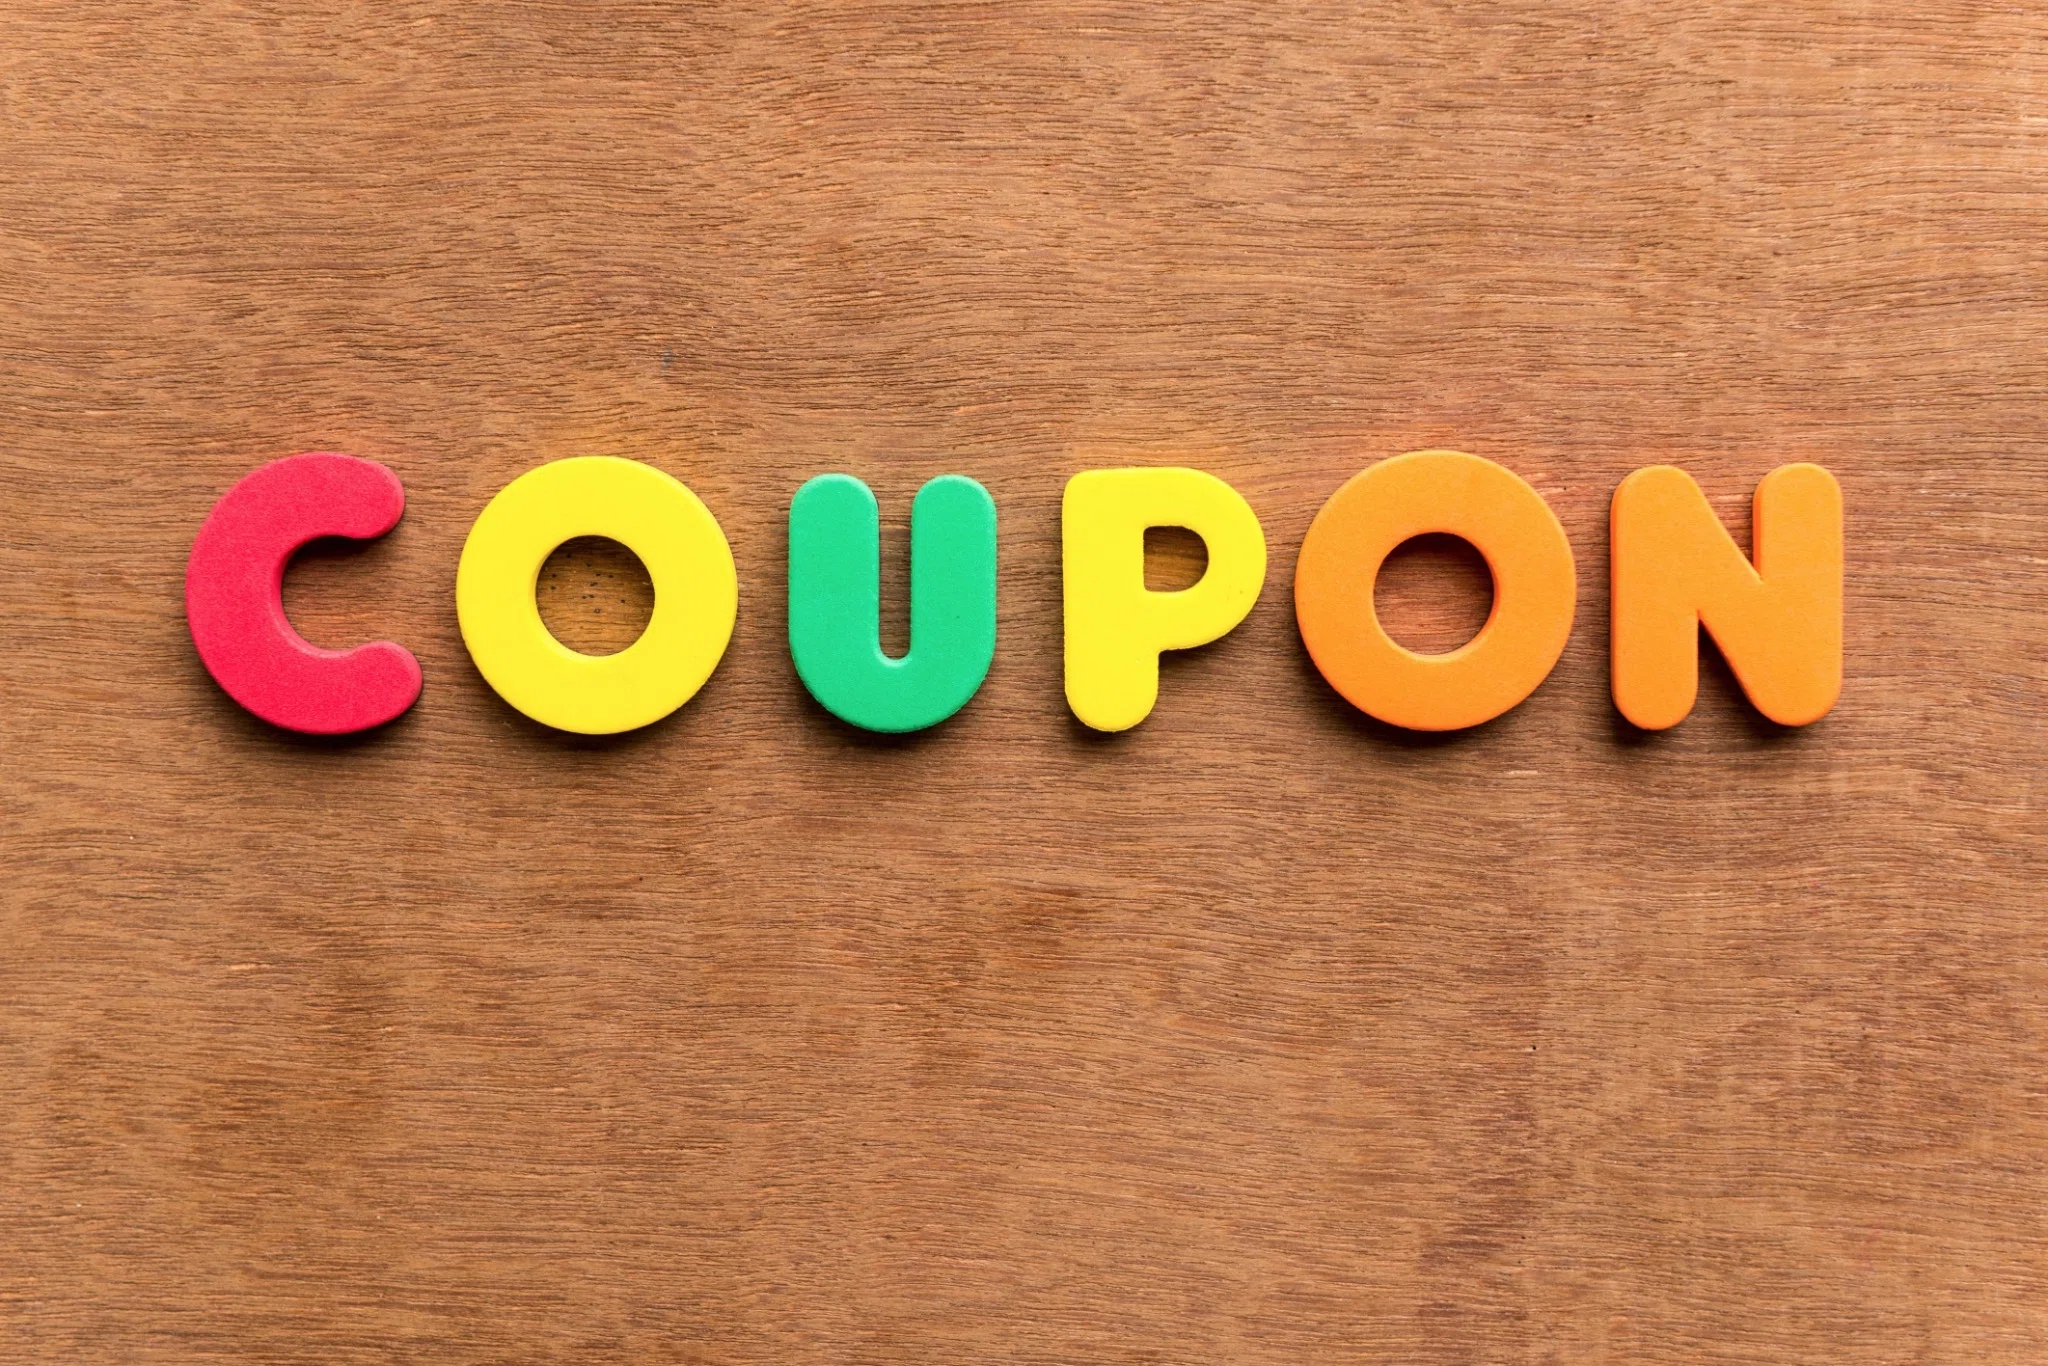 Couponing Abbreviations and Terms